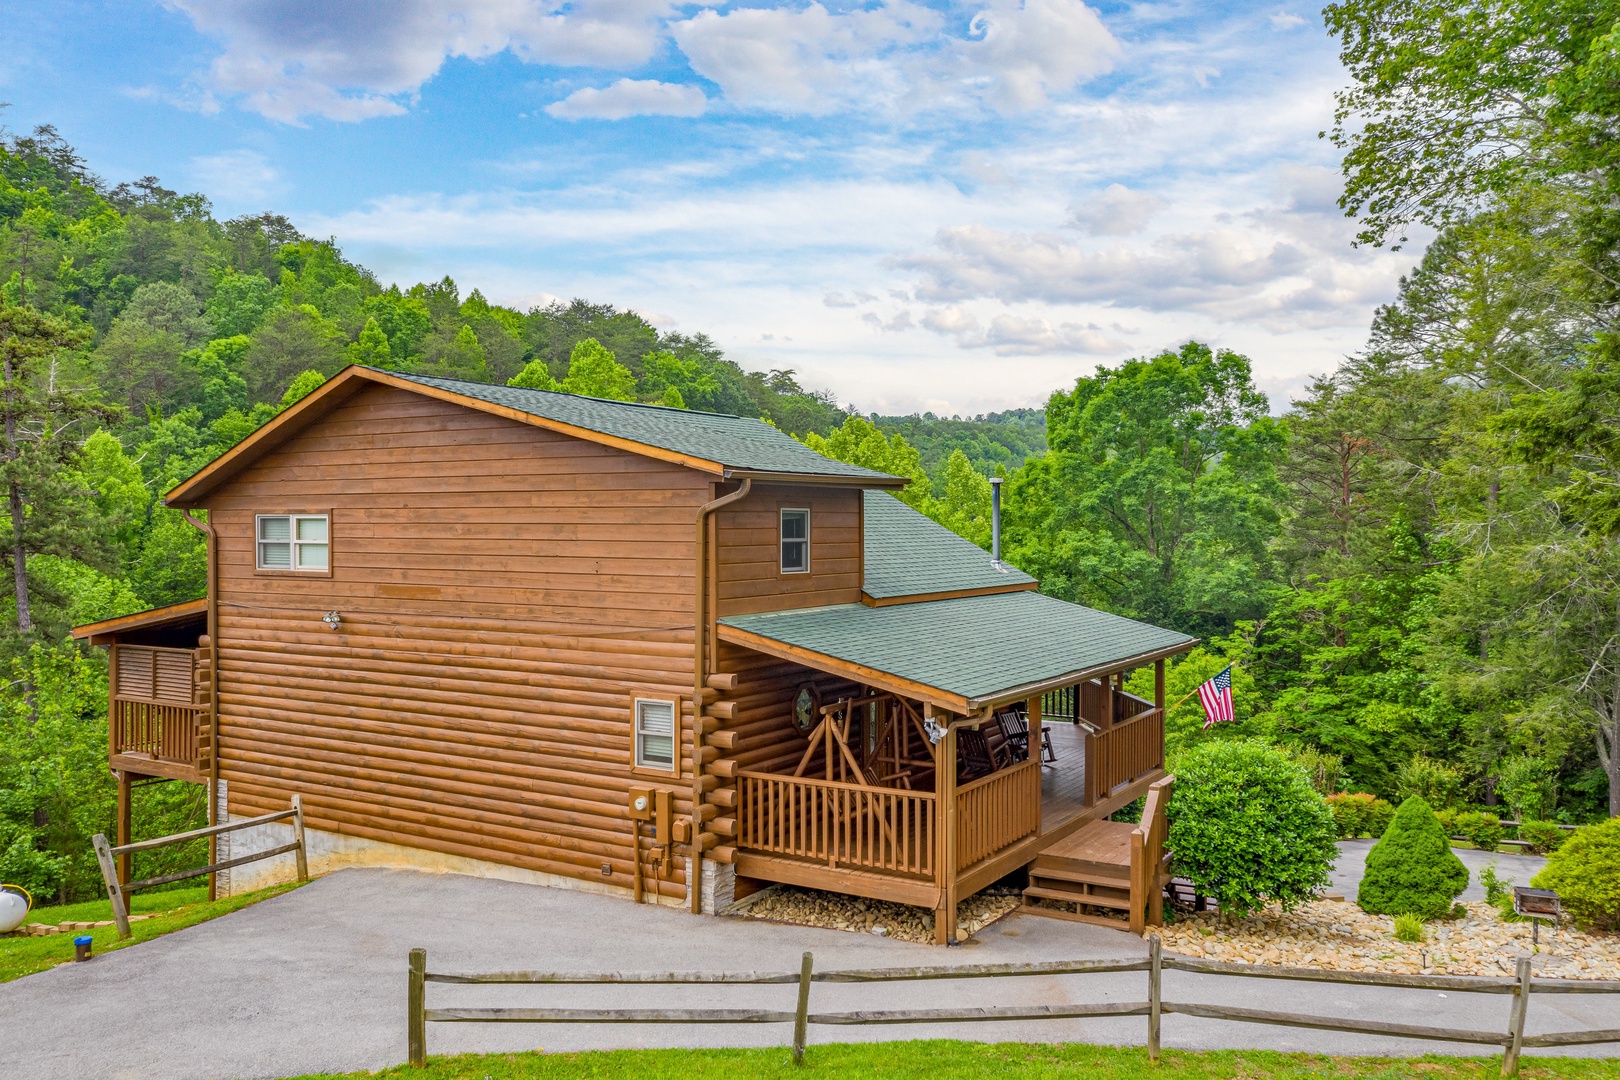 Driveway and fence at Almost Bearadise, a 4 bedroom cabin rental located in Pigeon Forge